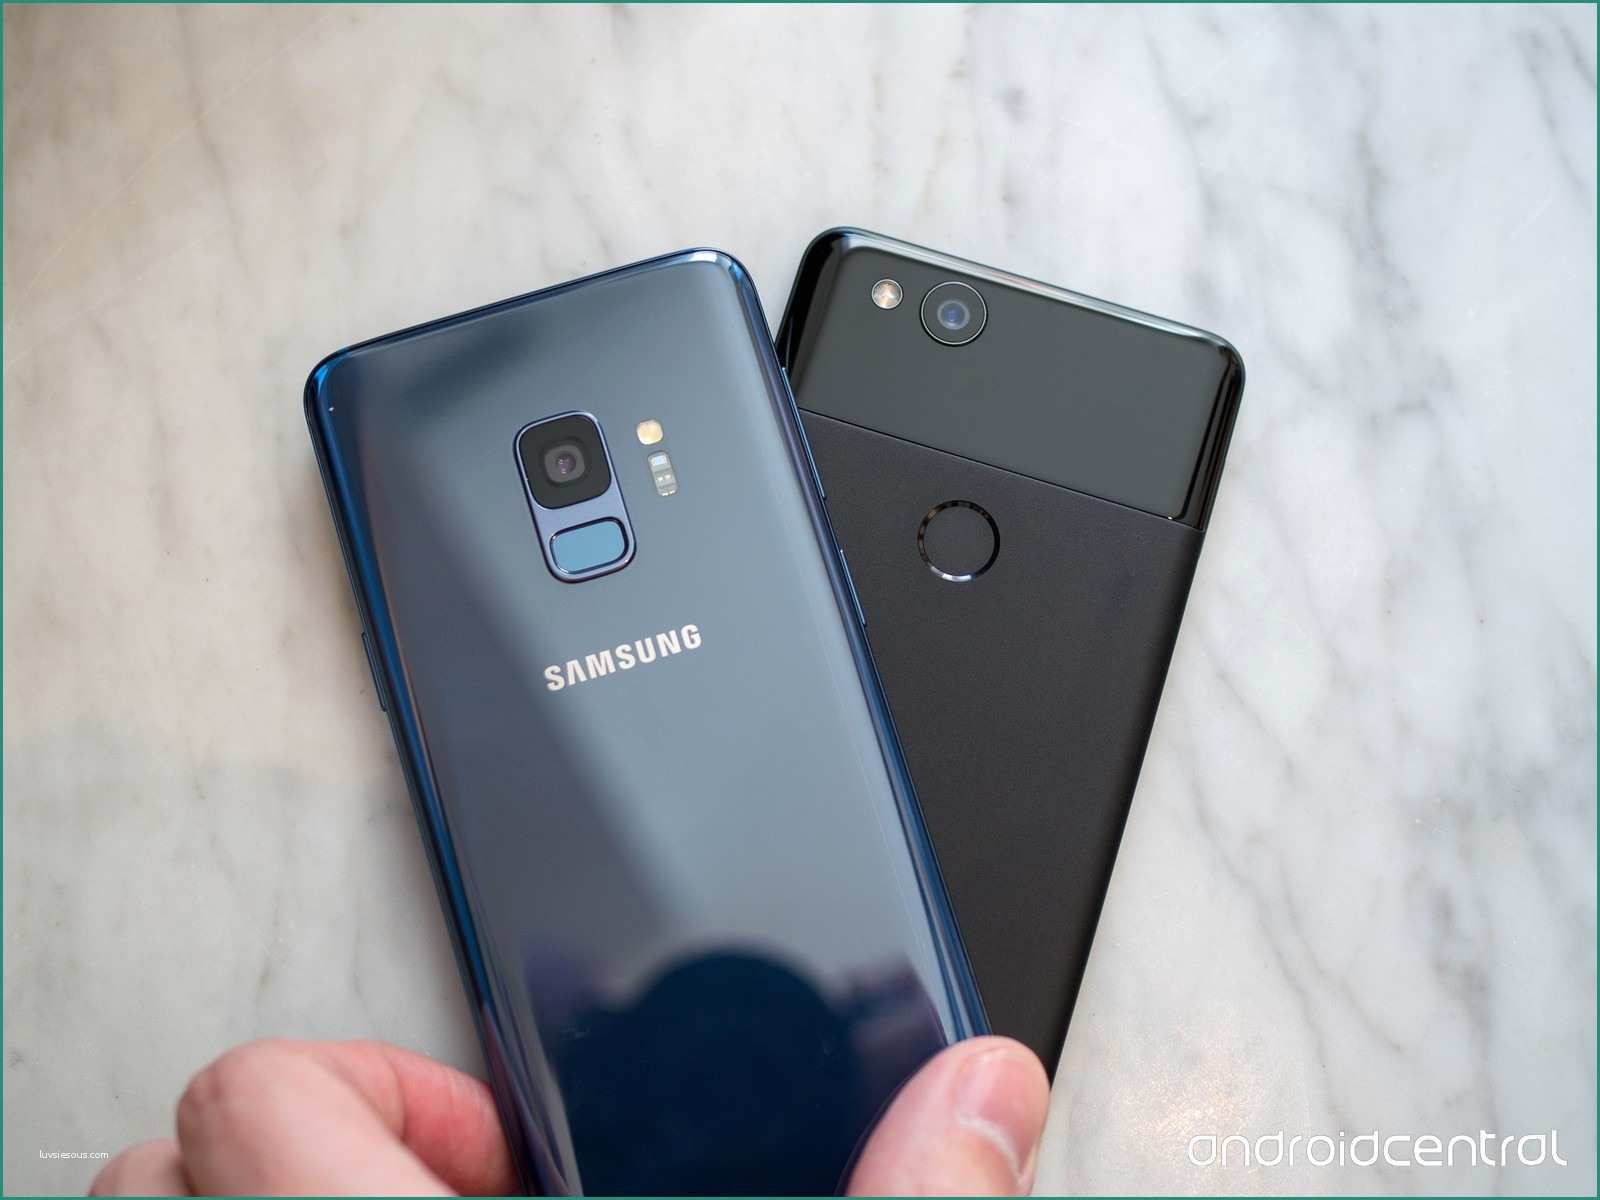 Case Mobili Moderne E Samsung Galaxy S9 Vs Google Pixel 2 which Should You